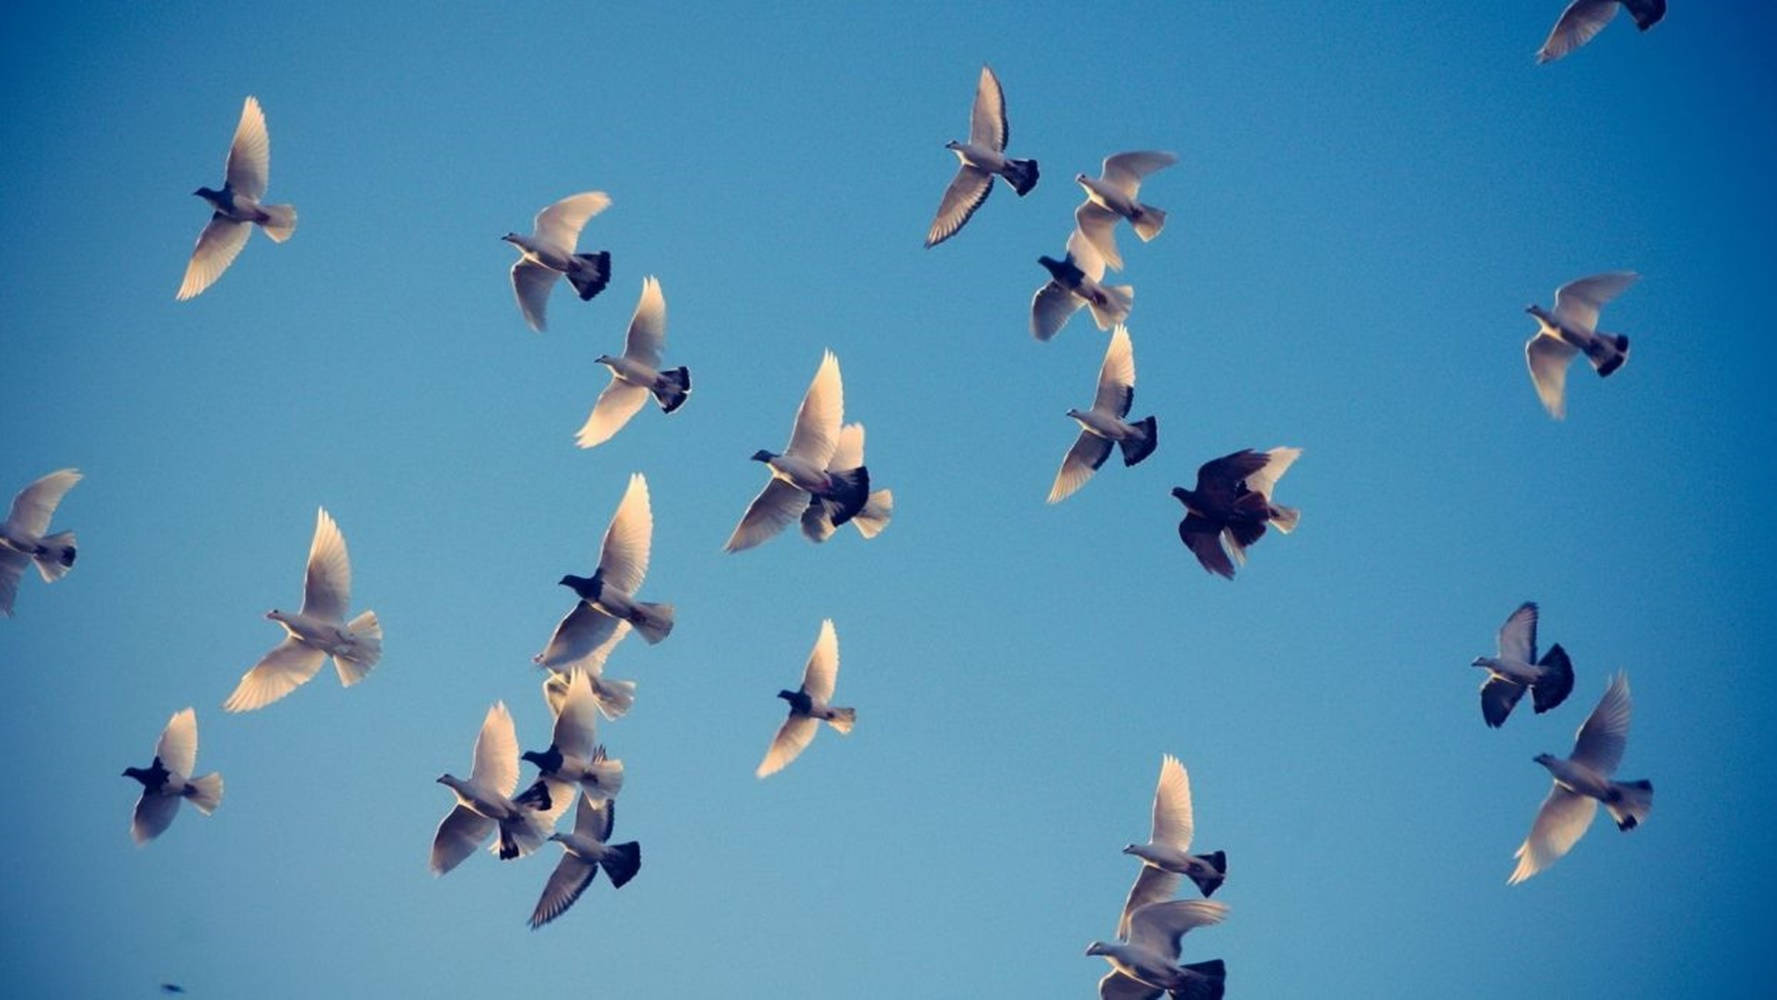 Group Of Birds Flying Over The Clear Sky Wallpaper